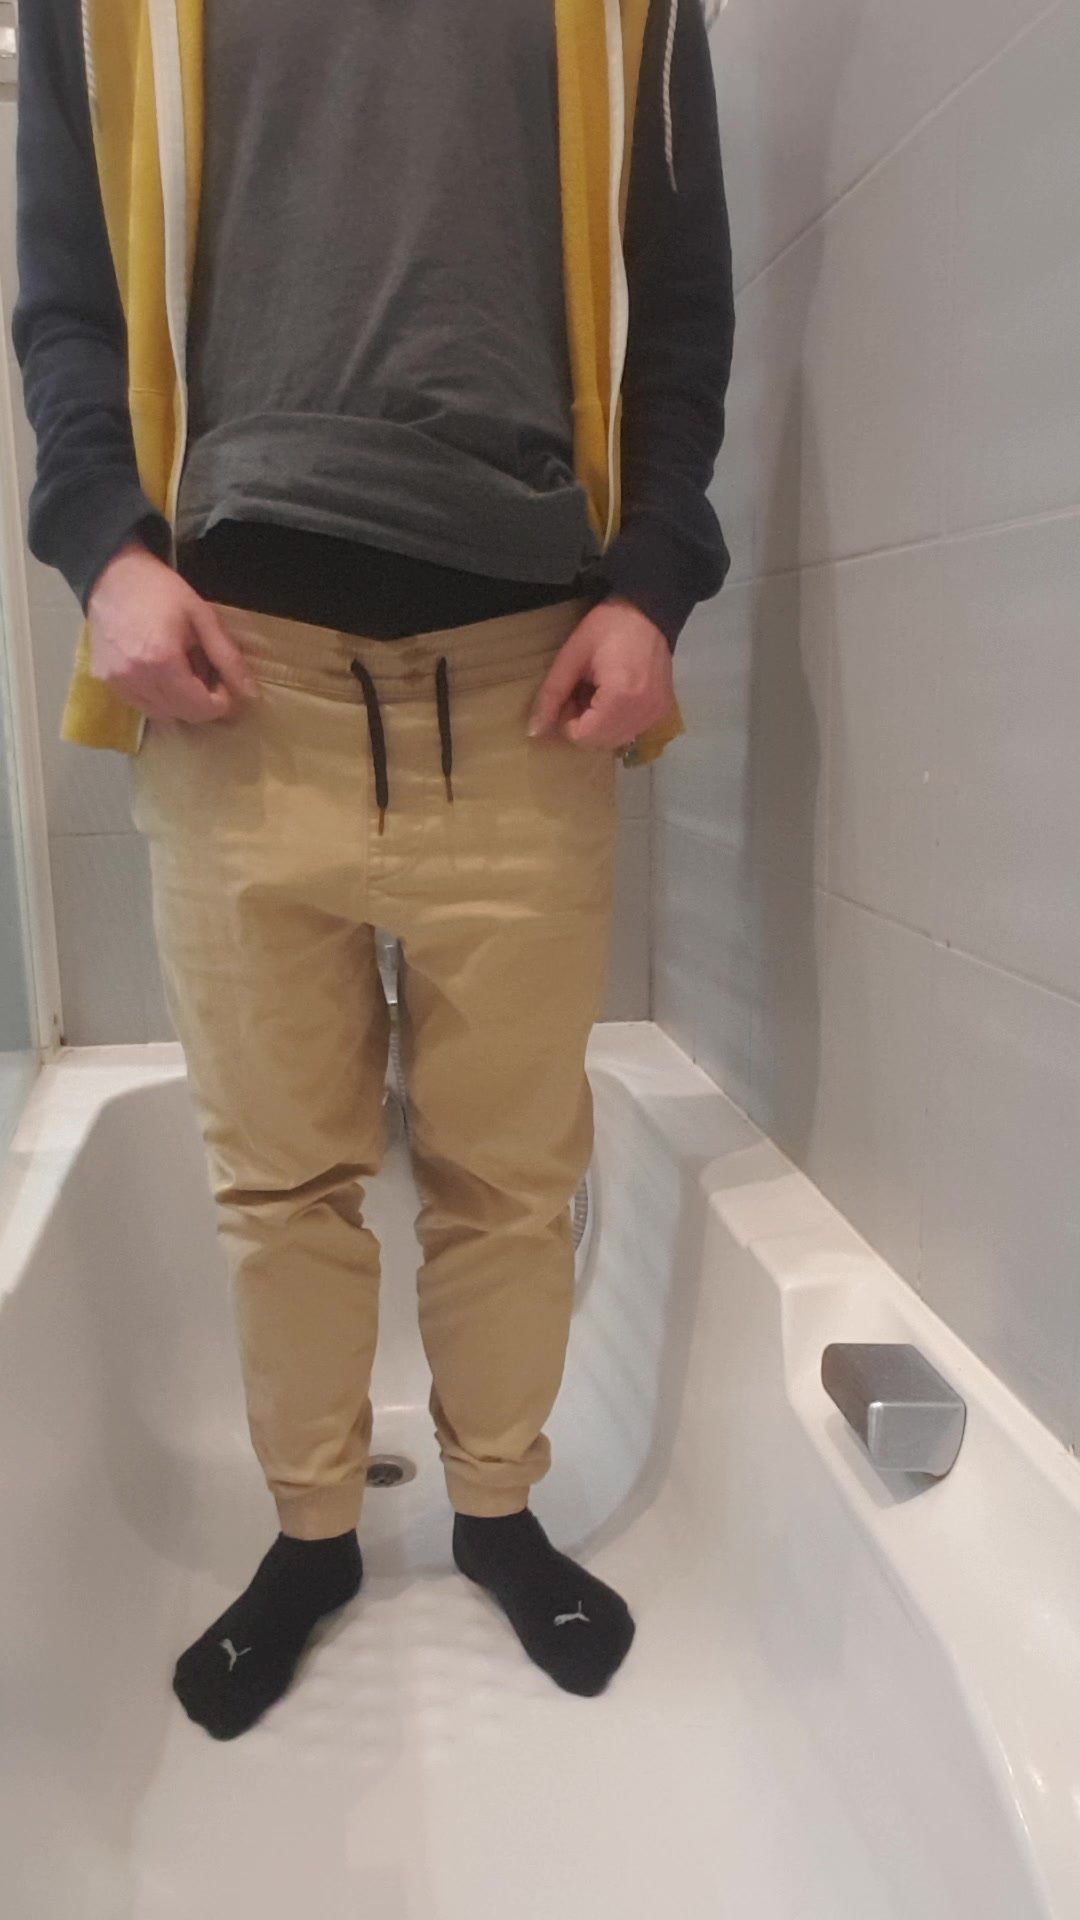 Pissing my joggers